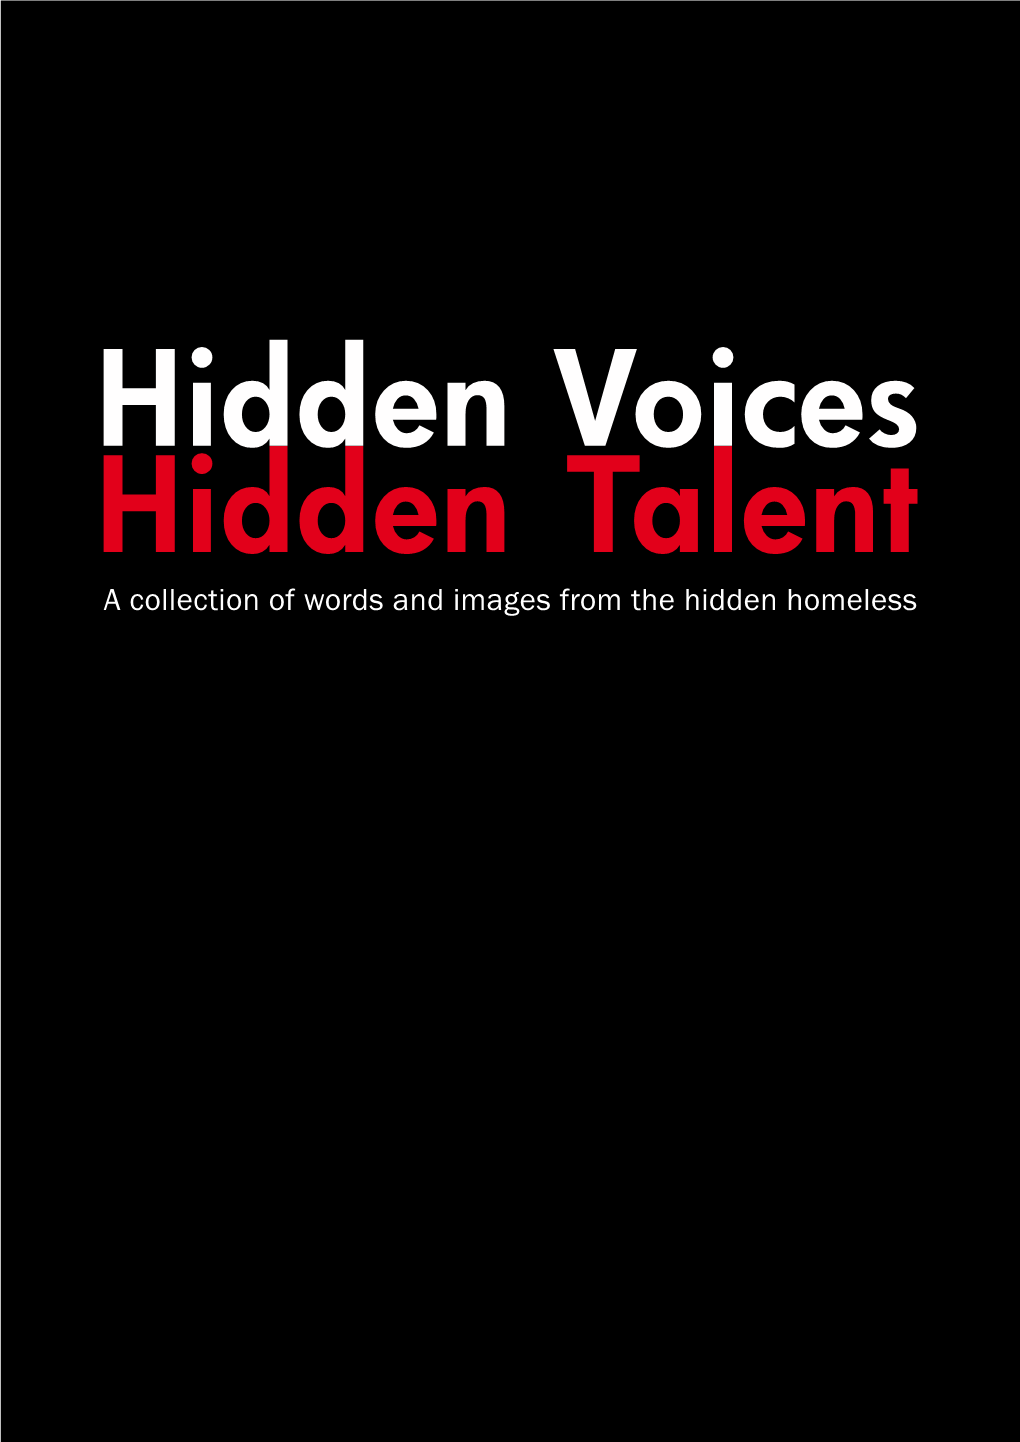 Hidden Voices Project the Hidden Voices Project All Began at a Service User Meeting the Project Was Run by Artworks Creative Communities and the in 2009